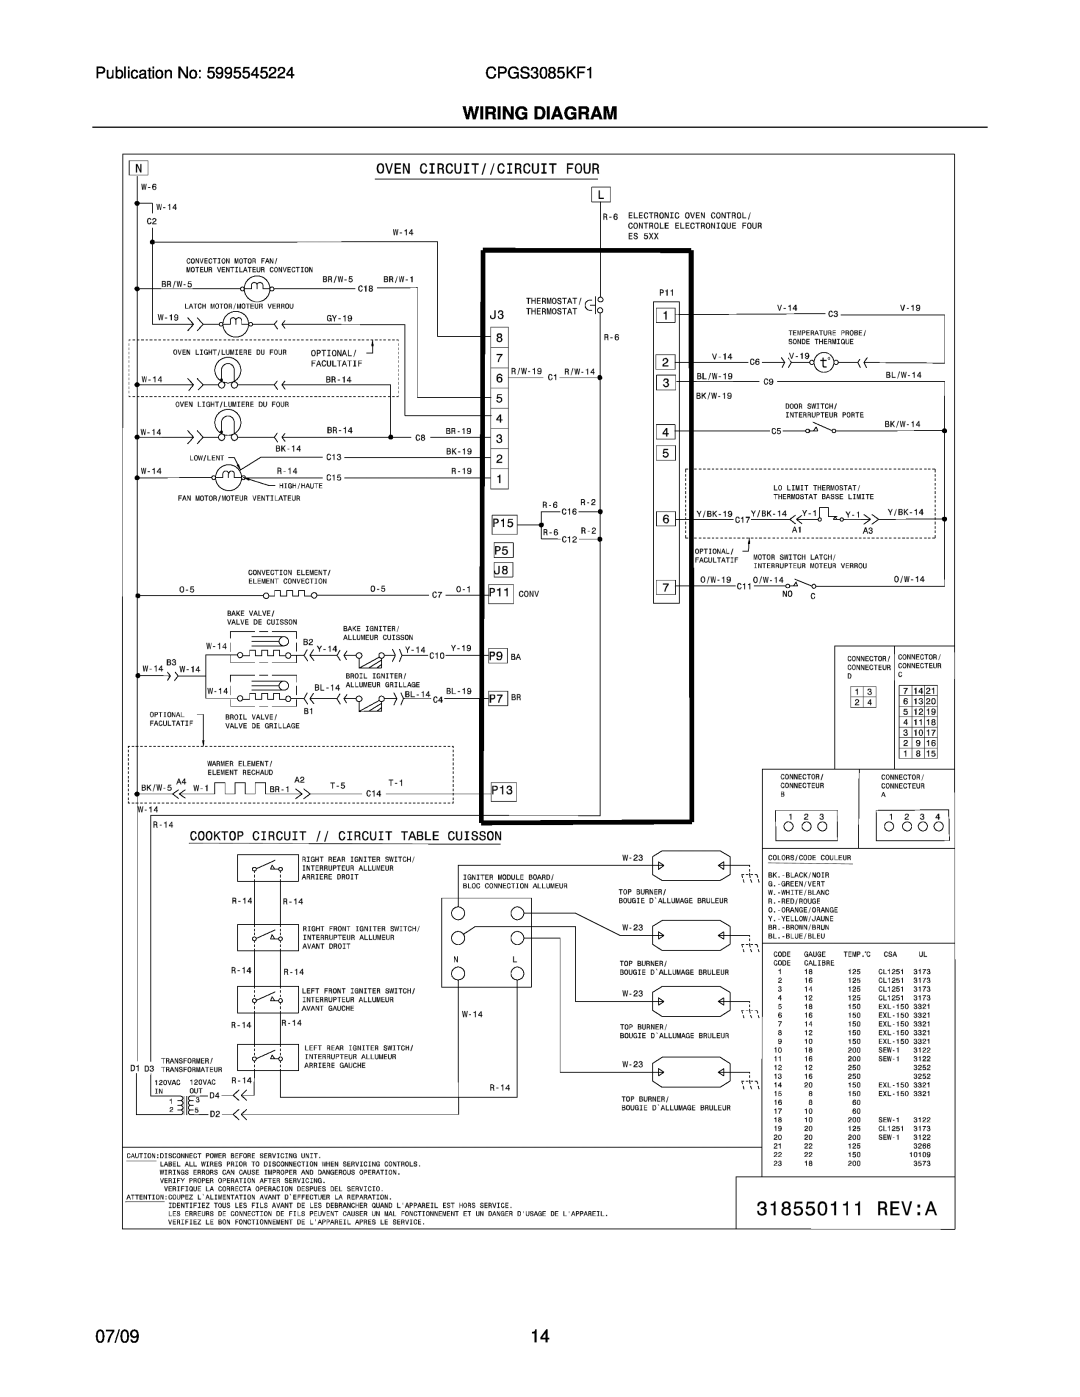 Electrolux CPGS3085KF1, 39452391M93S1 installation instructions Wiring Diagram, 07/09 